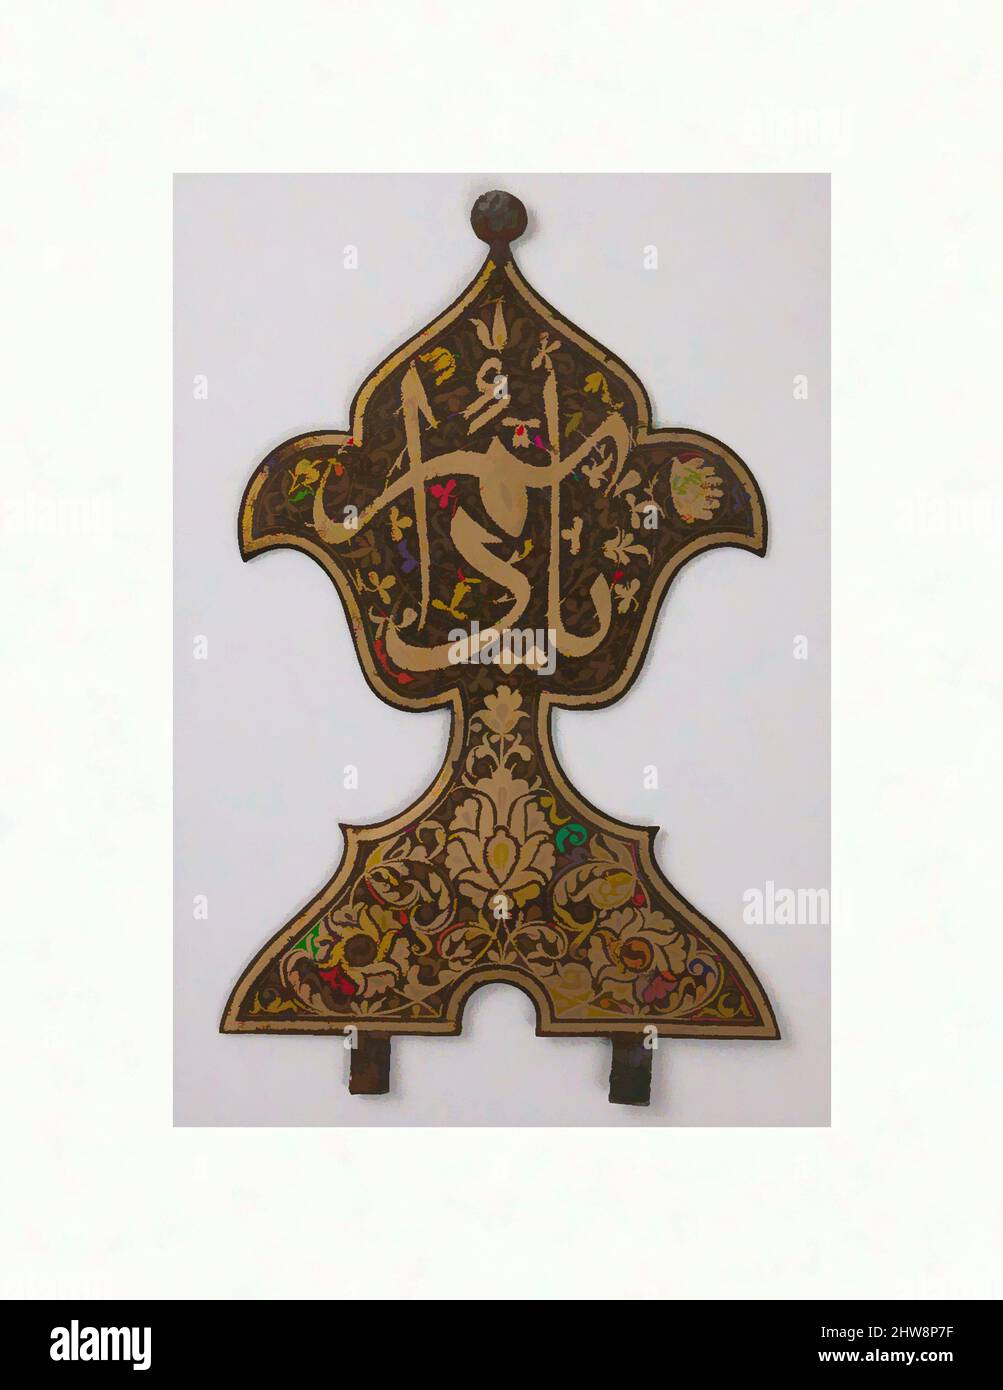 Art inspired by Finial with Arabic Inscription'Ya, Da'im' ('Oh, Everlasting!'), 17th century, Attributed to probably Iran, Steel; inlaid with gold on front and silver foil overlay on reverse, H. (with brackets) 7 3/4 in. (19.7 cm), Metal, Finials such as this example likely came from, Classic works modernized by Artotop with a splash of modernity. Shapes, color and value, eye-catching visual impact on art. Emotions through freedom of artworks in a contemporary way. A timeless message pursuing a wildly creative new direction. Artists turning to the digital medium and creating the Artotop NFT Stock Photo